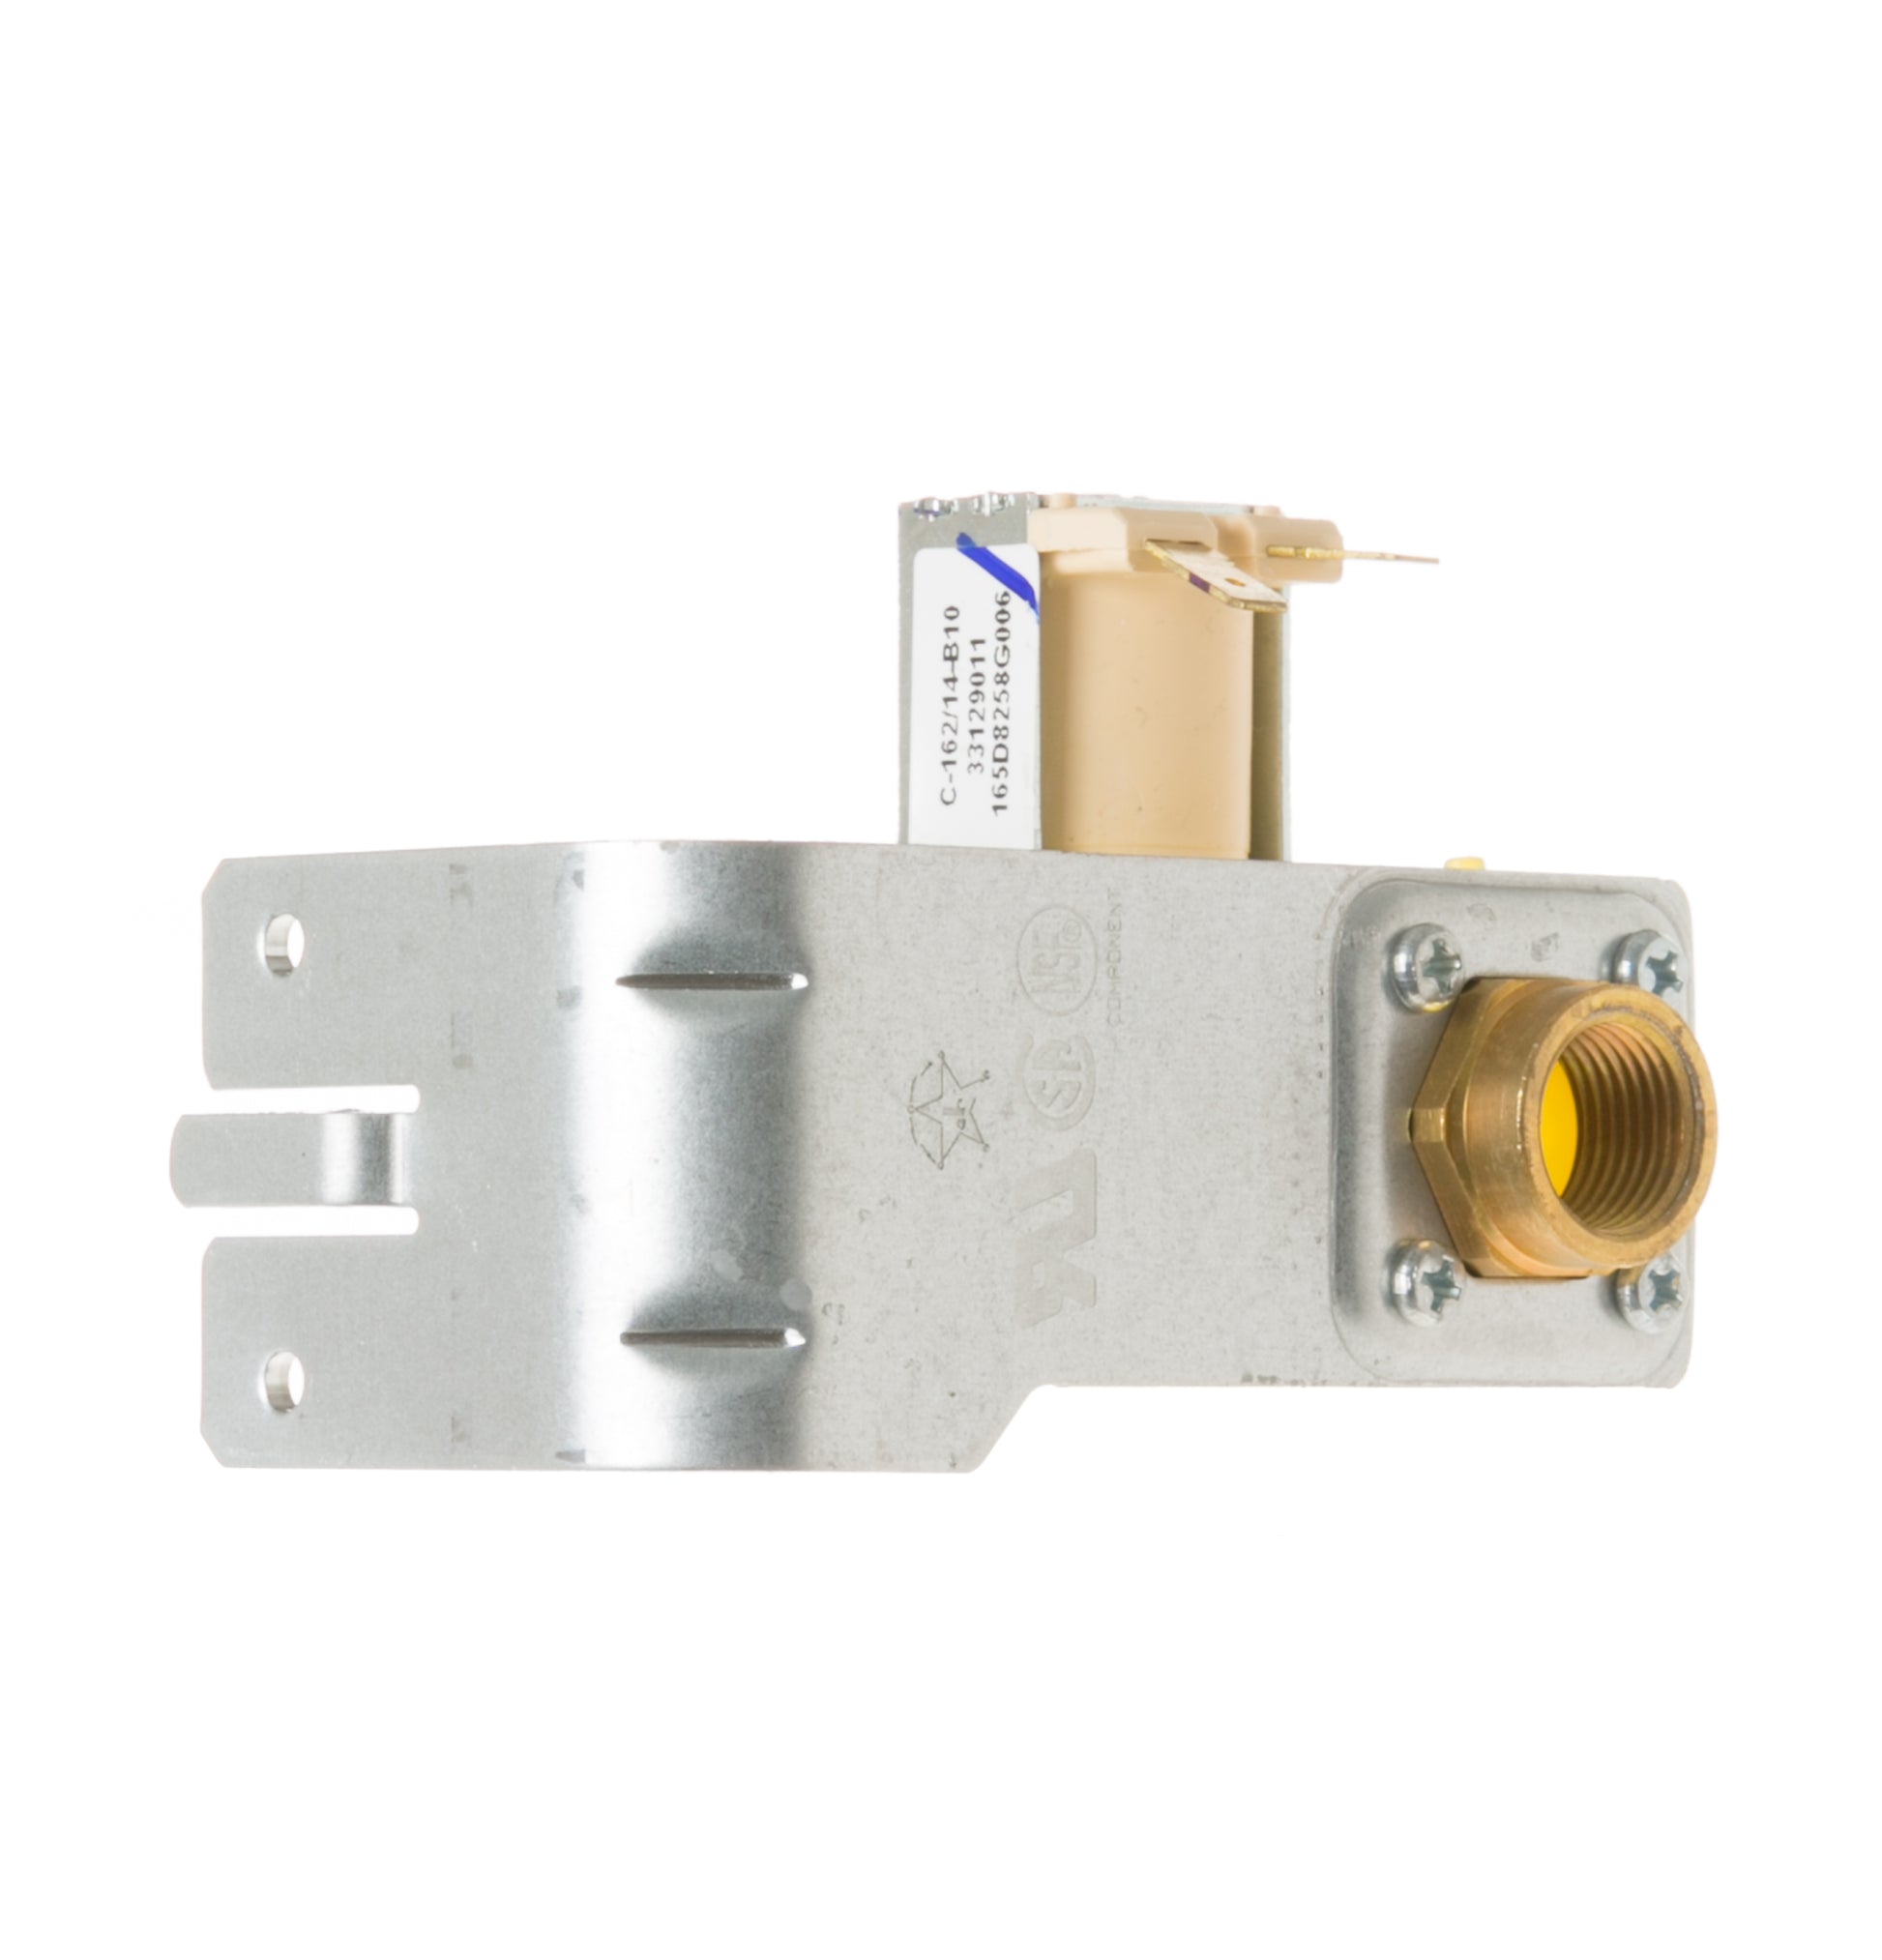 GE Dishwasher Water Inlet Valve - WG04F04135, Replaces: AH5573535 EA10055557 EA5573535 EAP10055557 WD04M00066 WD04M66 WD4M00066 WD4M66